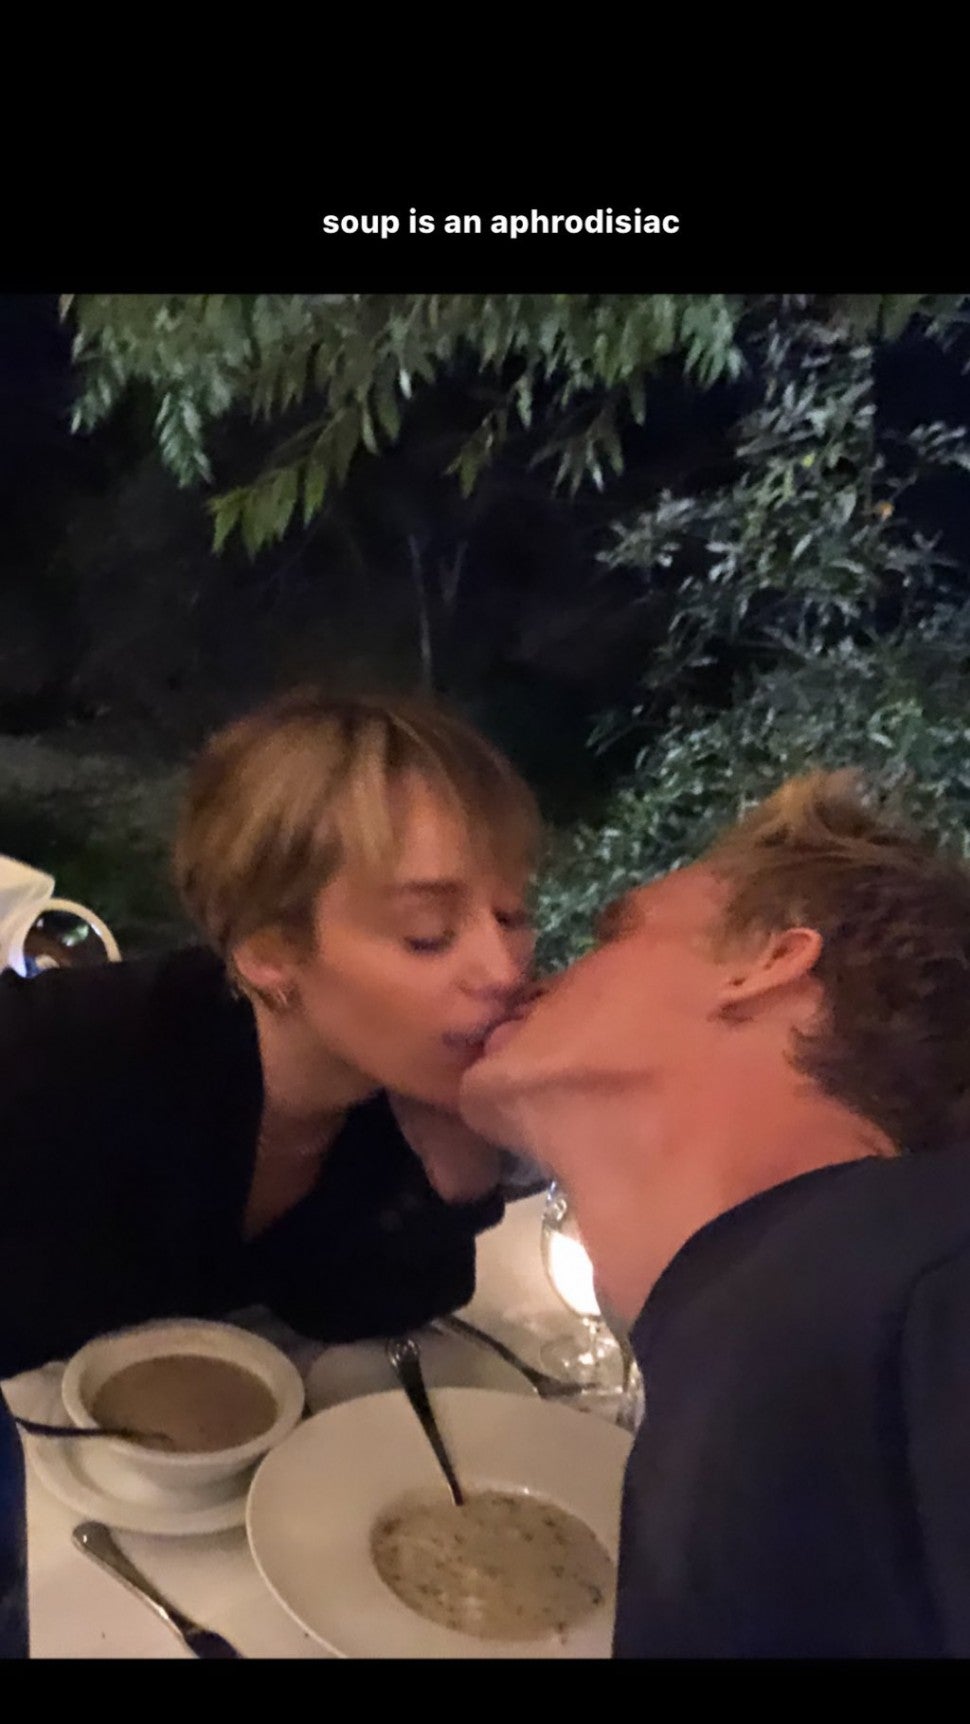 miley and cody kiss over soup